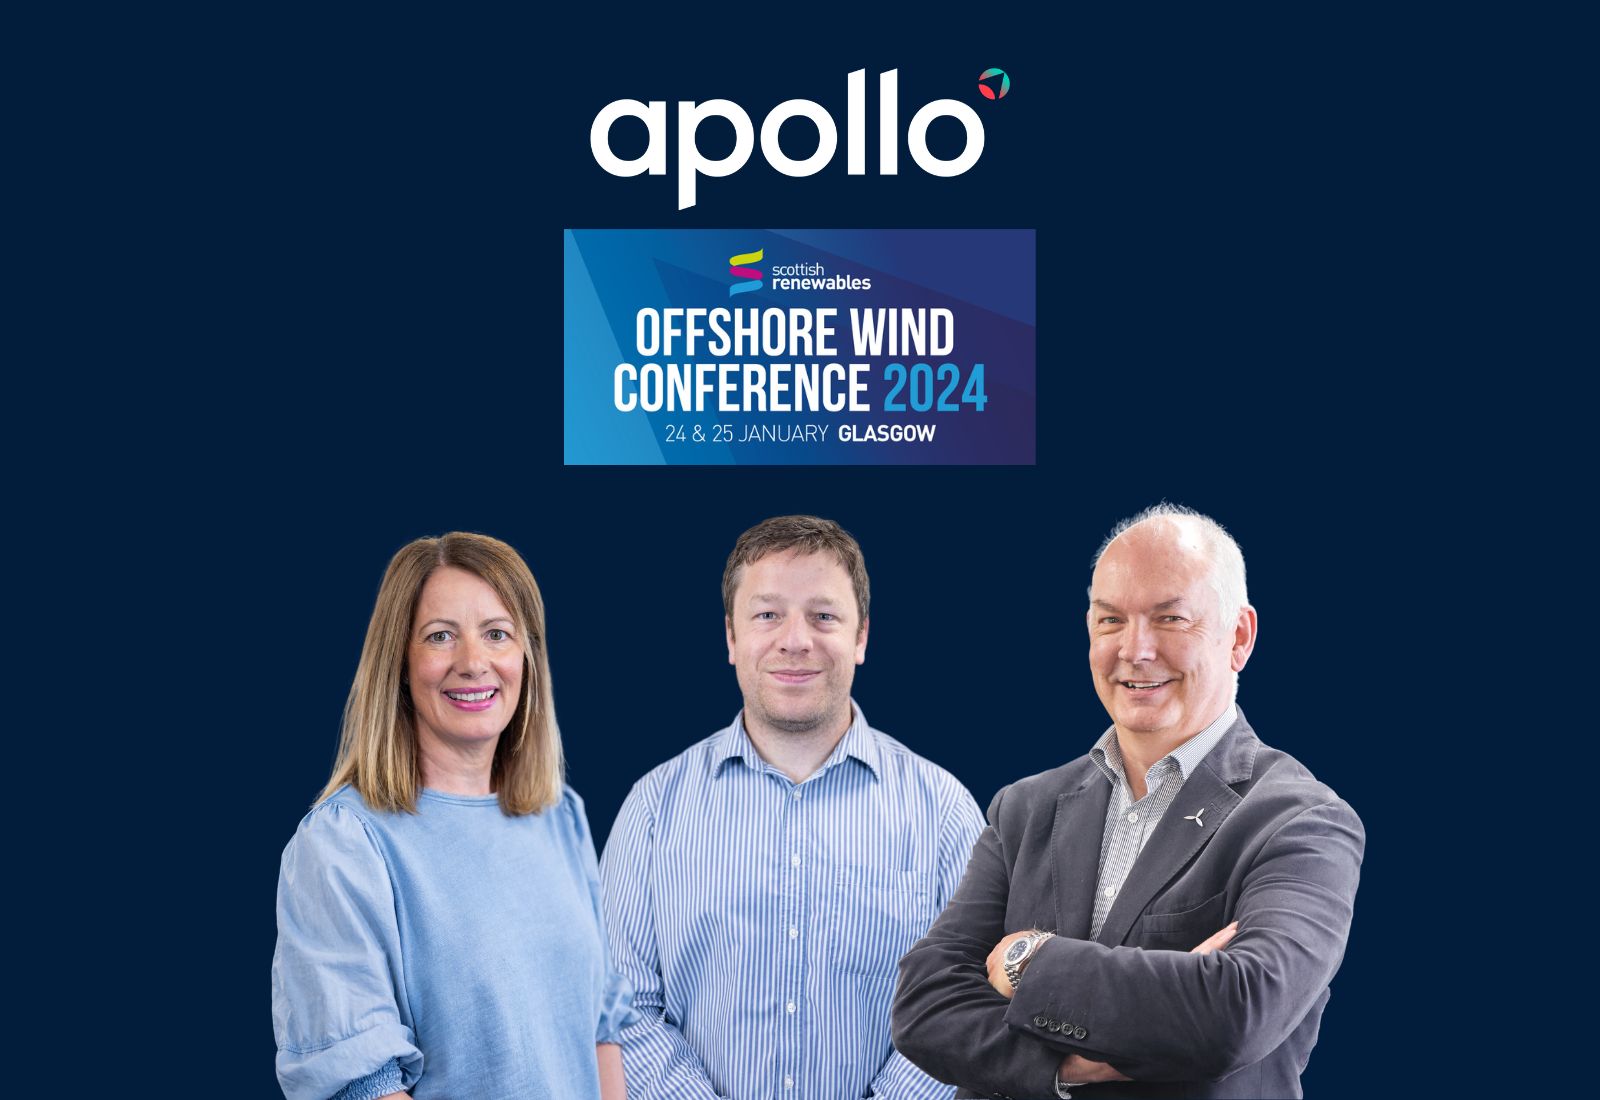 This example shows 3 people from Apollo who will be attending the Offshore Wind Conference in Glasgow on 24-25 January 2024